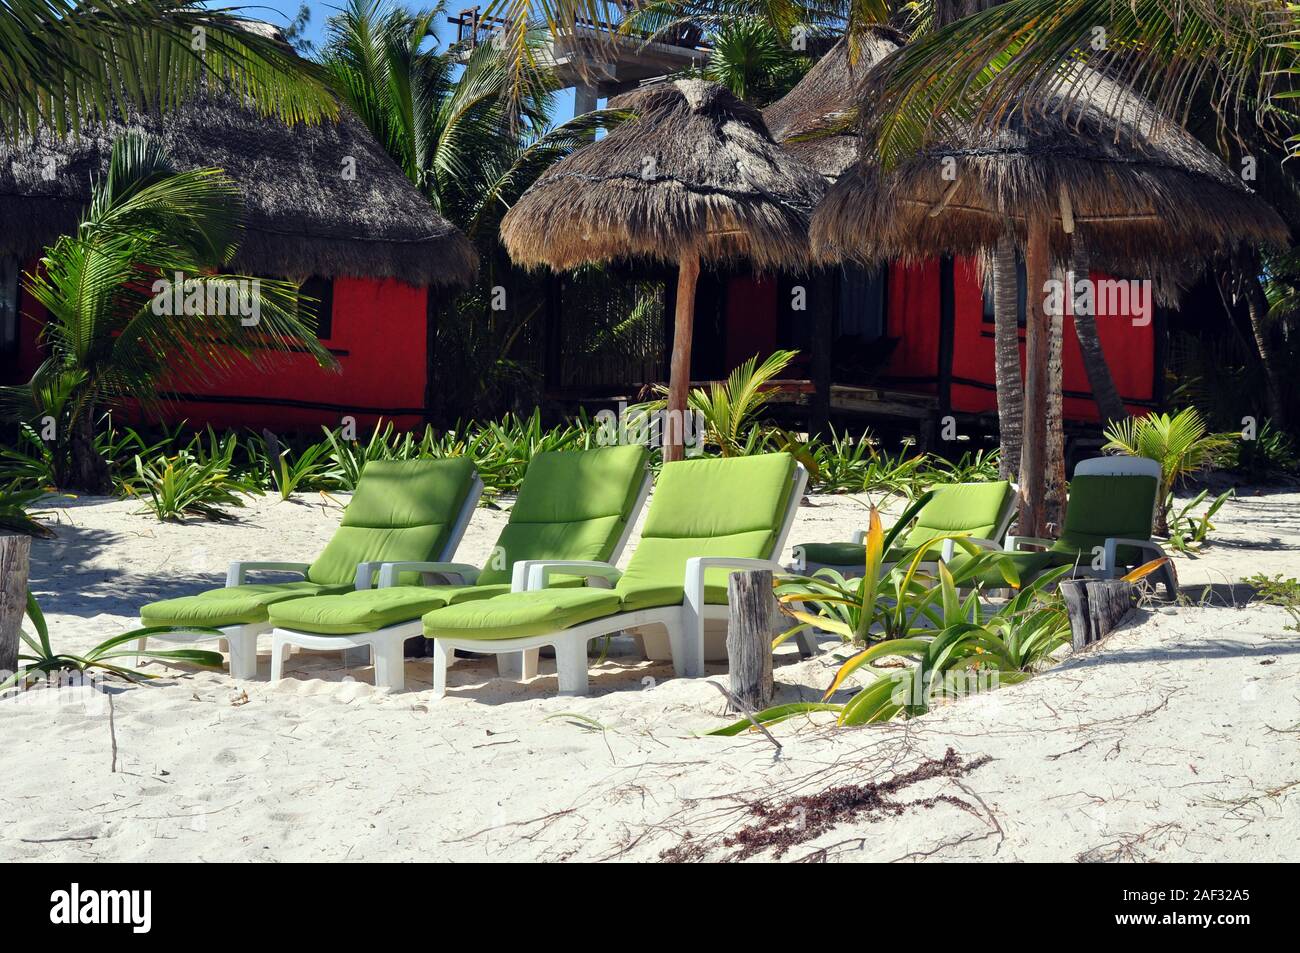 Green Lounge Chairs in the Sand with Two Orange Beach Huts and Thatch Beach Umbrellas Stock Photo